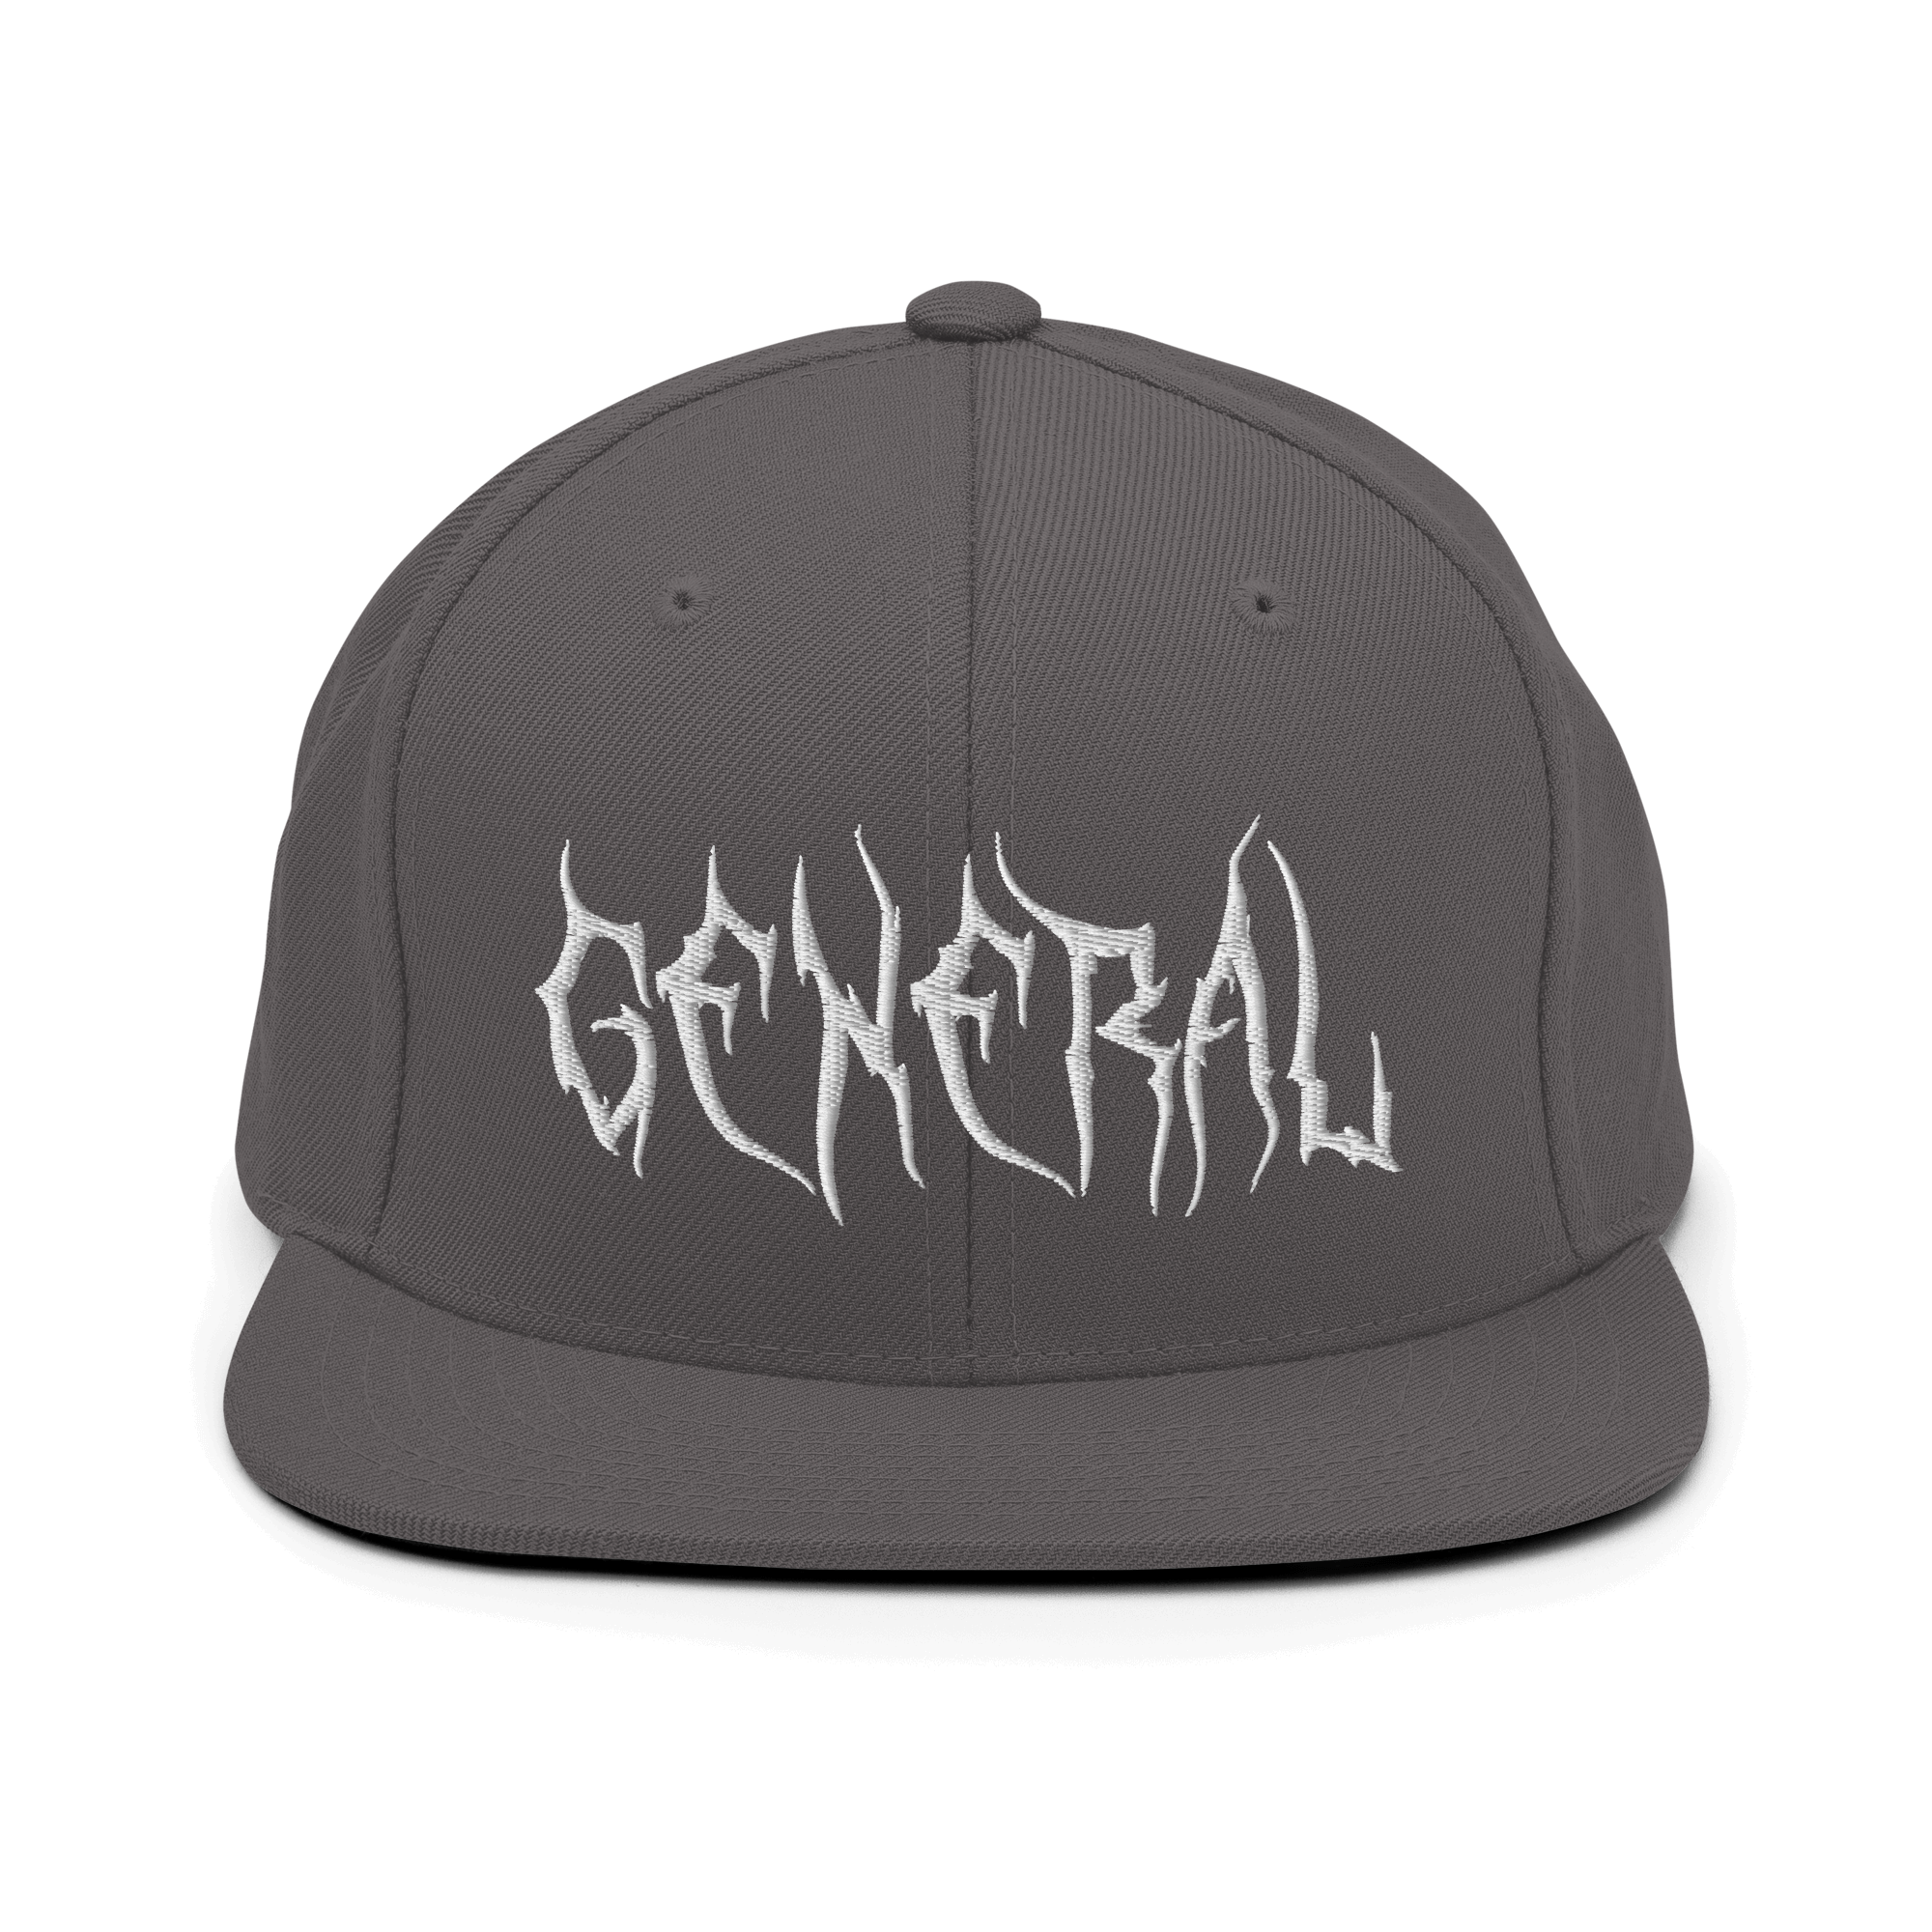 General Snapback CapCommand attention with the General Snapback Cap – a classic fit, flat brim, and full buckram structure for timeless appeal. The adjustable snap closure ensures comfort in a one-size-fits-most design. Crafted exclusively for you upon or